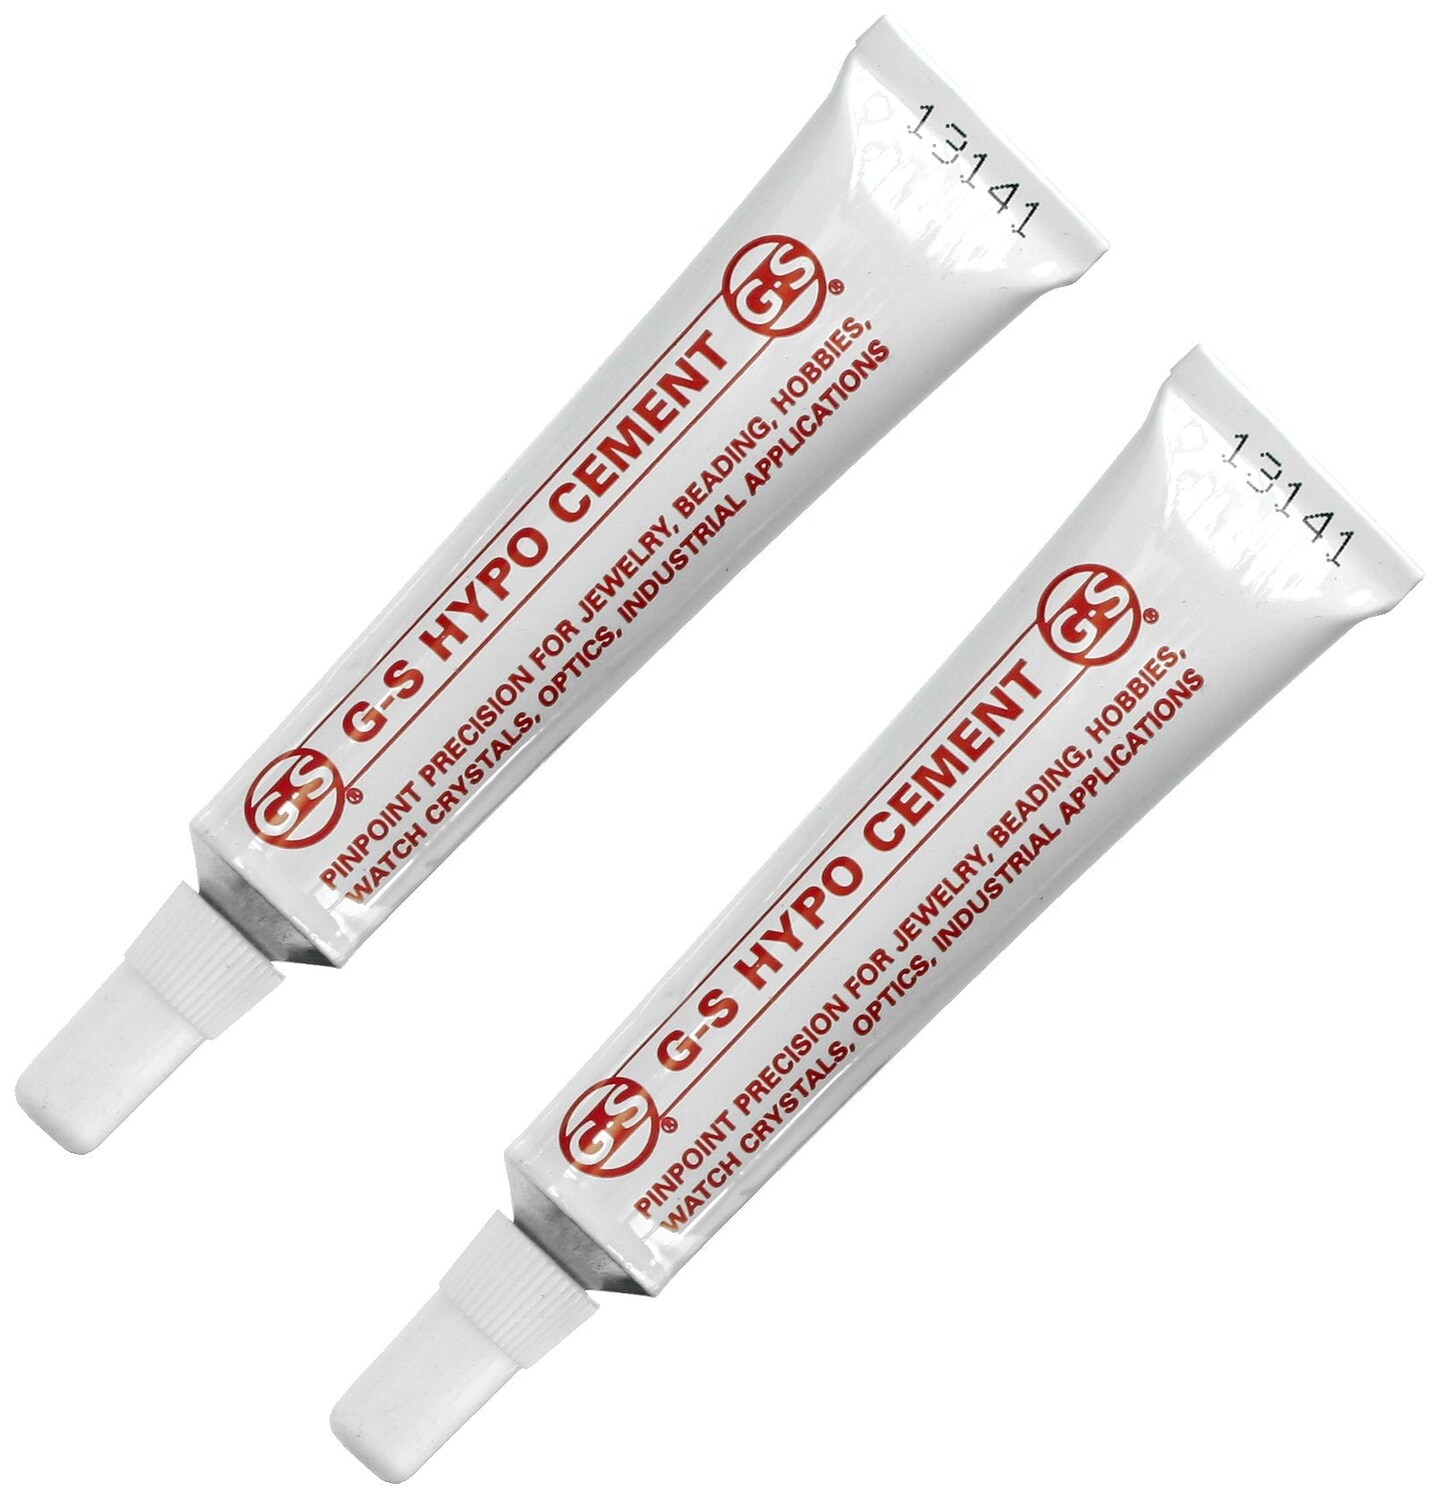 GS Hypo Cement Twin Pack, White